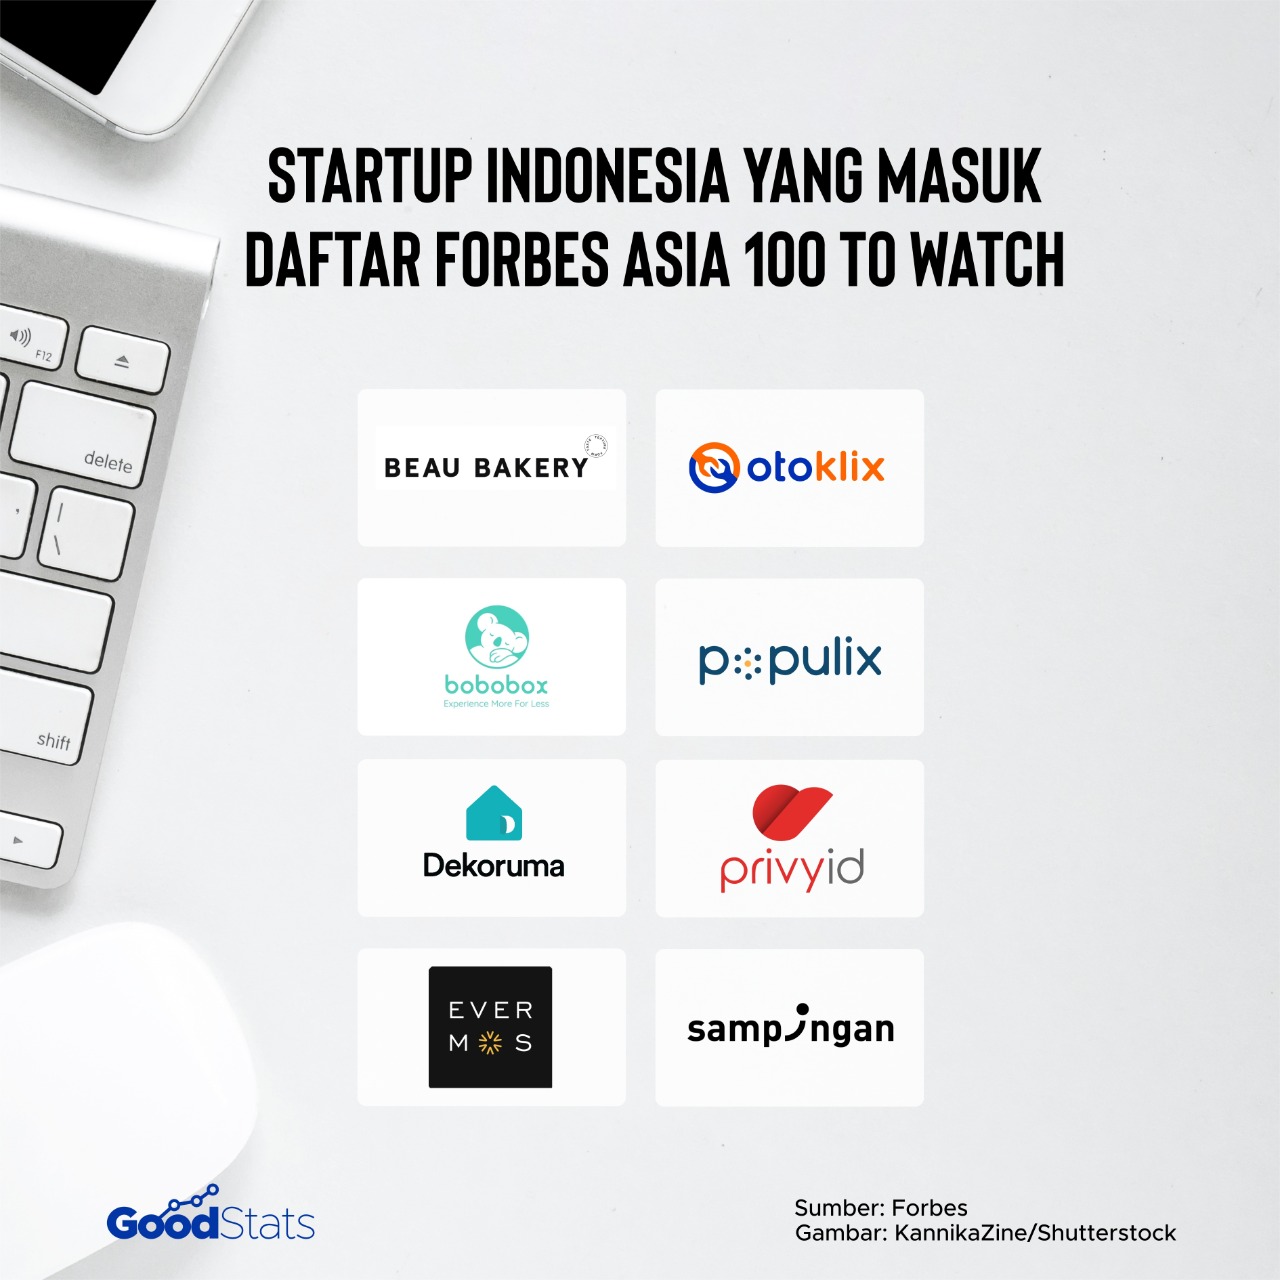 Daftar Startup Indonesia di Forbes Asia 100 to Watch | Goodstats